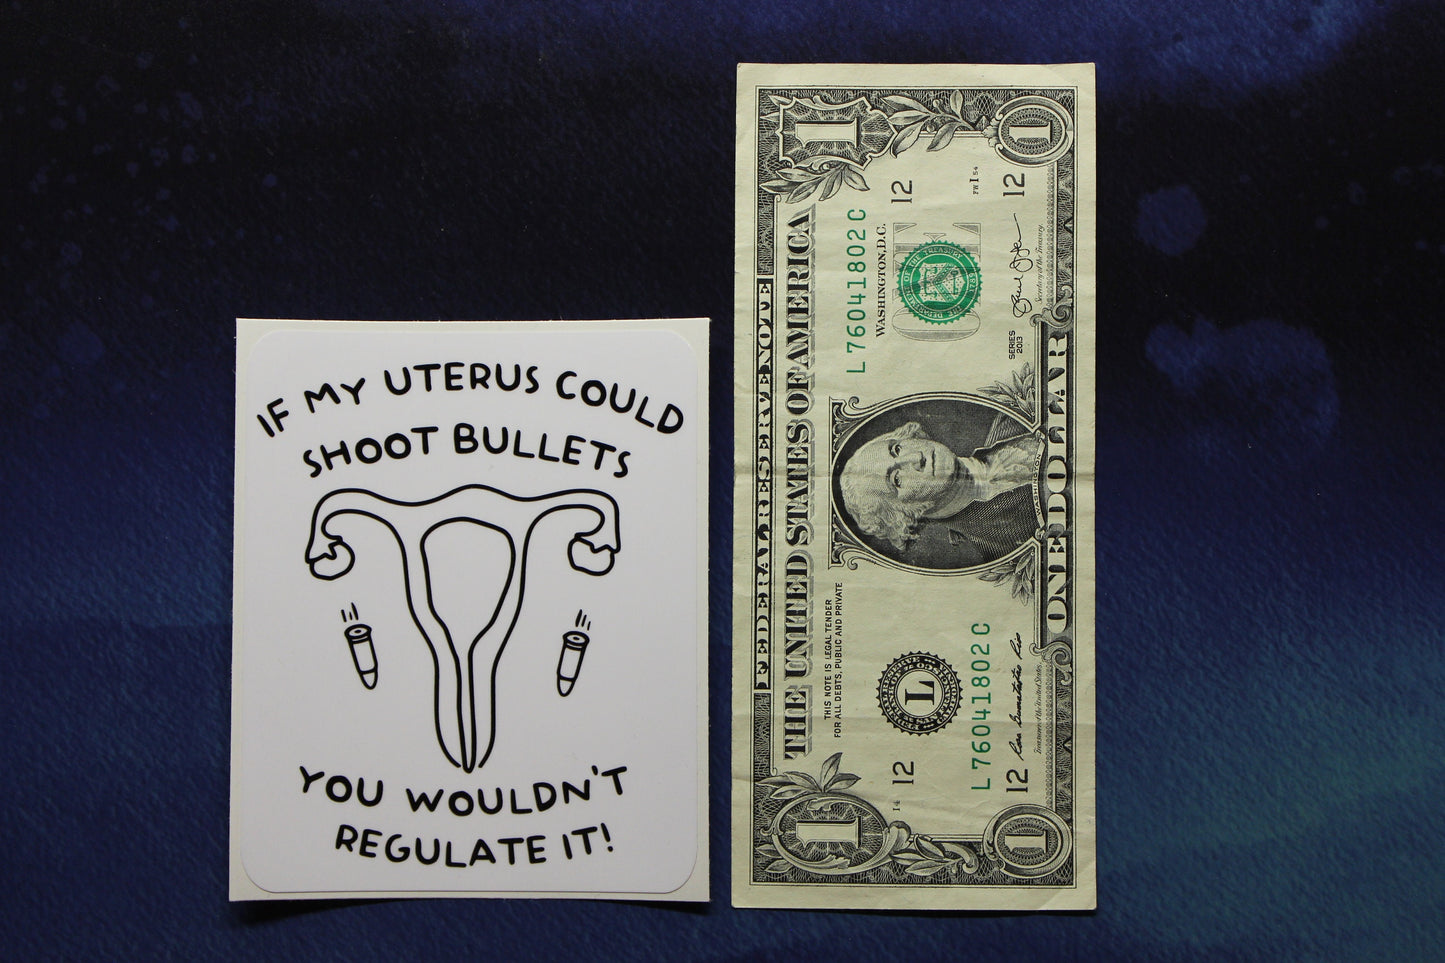 If My Uterus Could Shoot Bullets Vinyl Bumper Sticker Reproductive Rights